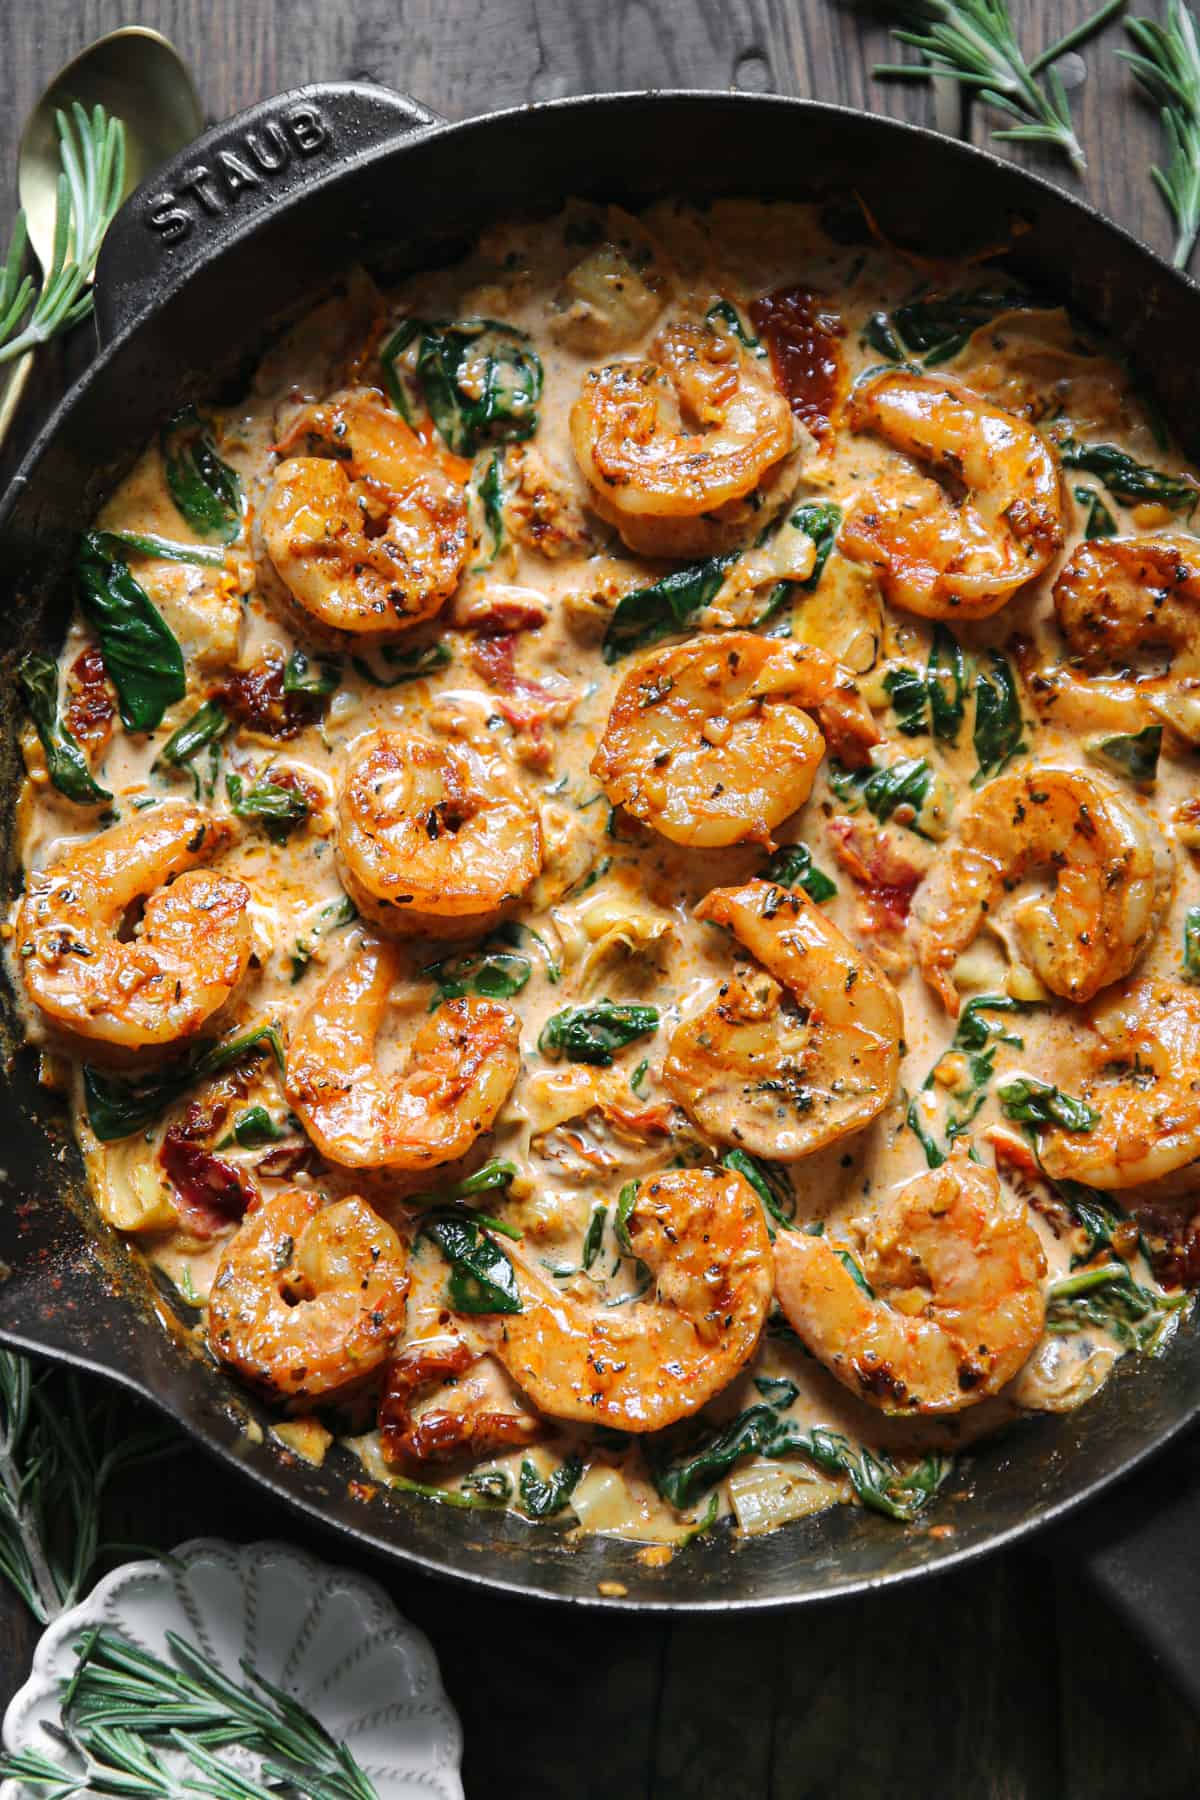 Creamy Tuscan Shrimp with Sun-Dried Tomatoes, Spinach, and Artichokes - in a cast iron skillet.